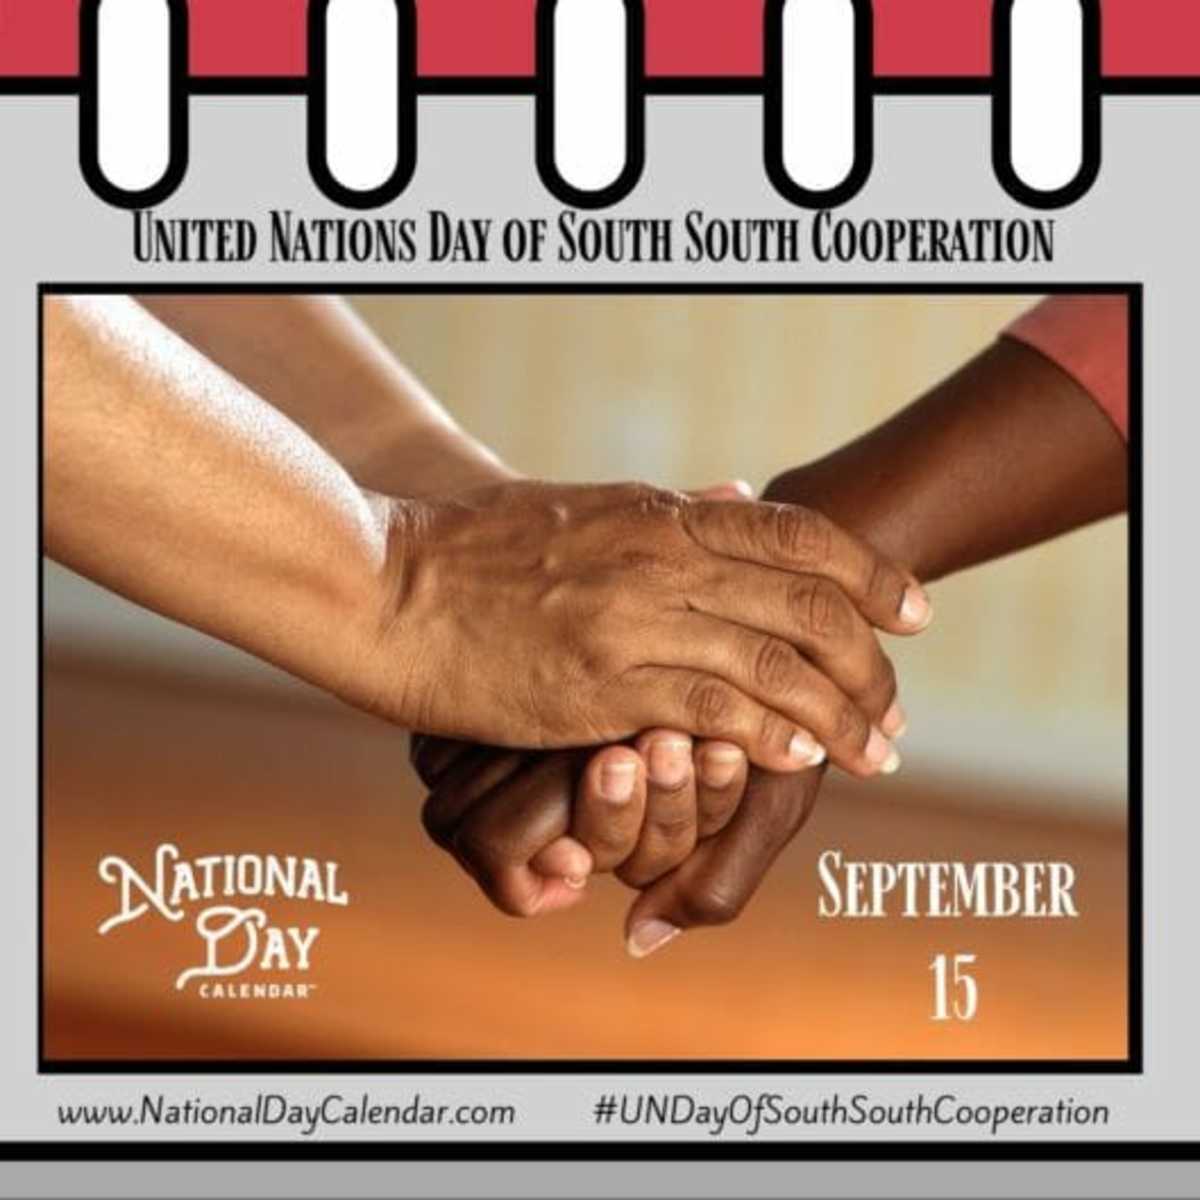 United Nations Day of South South Cooperation - September 15